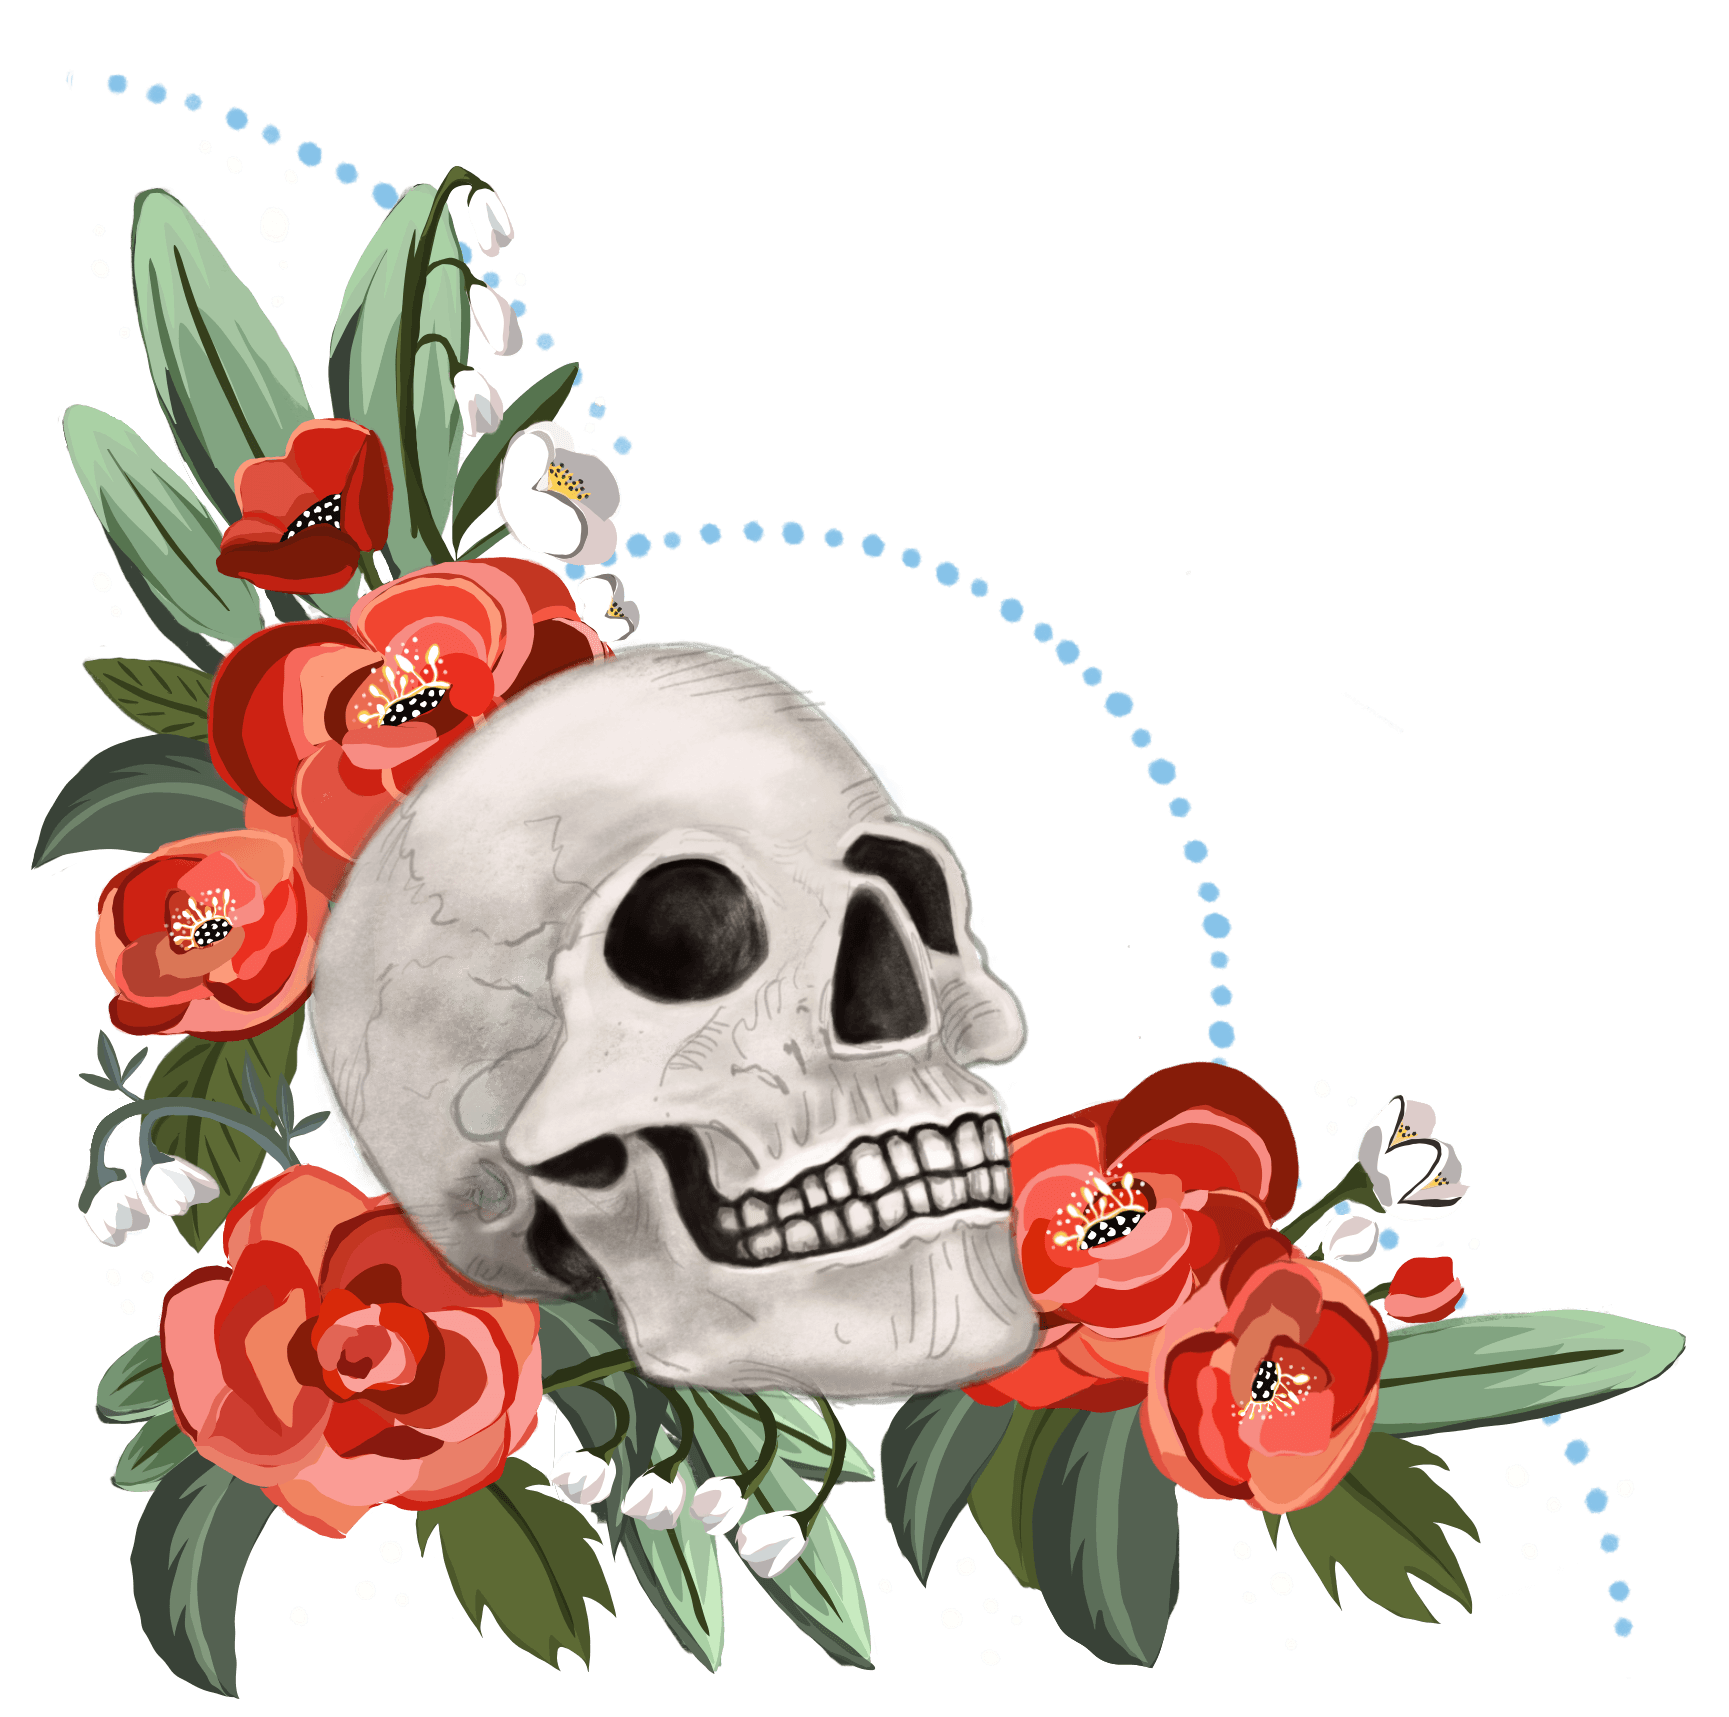 A skull is surrounded by flowers and leaves on a white background.